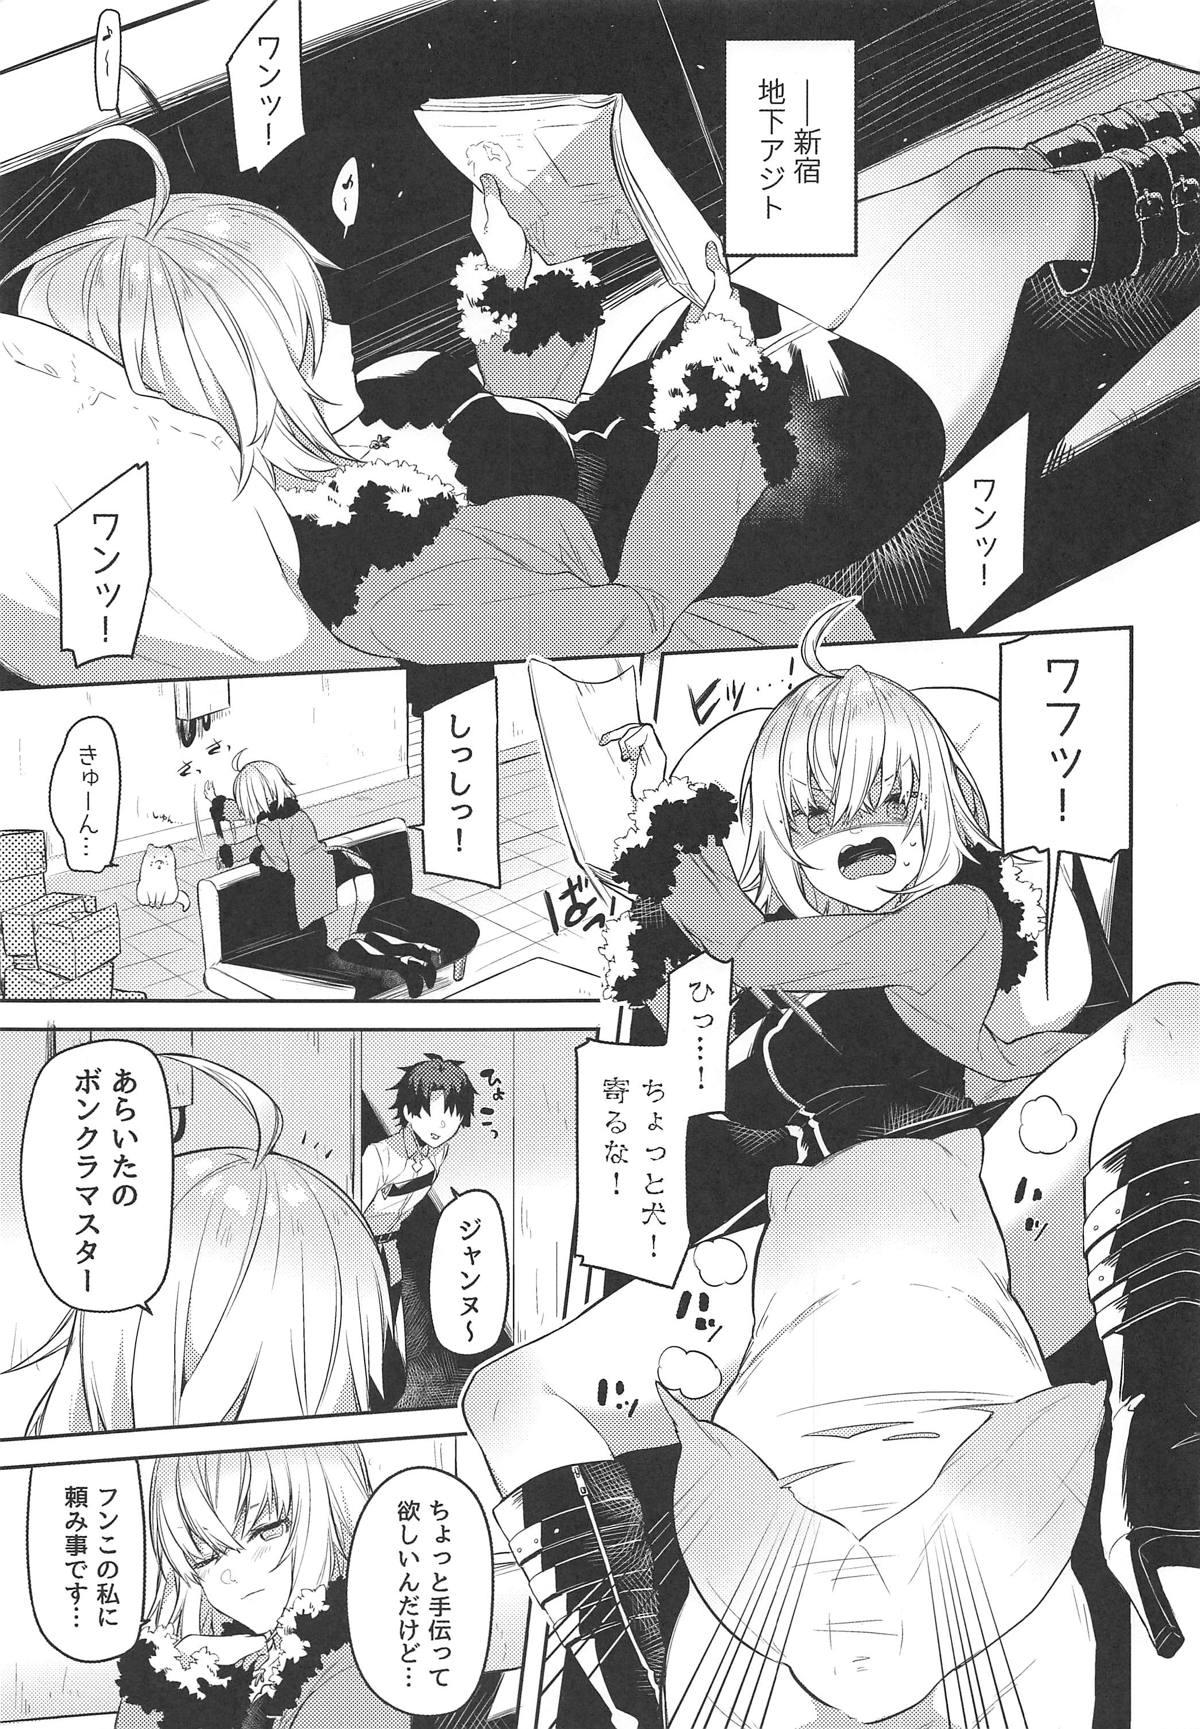 Pinoy Shinjuku Sneaking Mission - Fate grand order Weird - Page 2